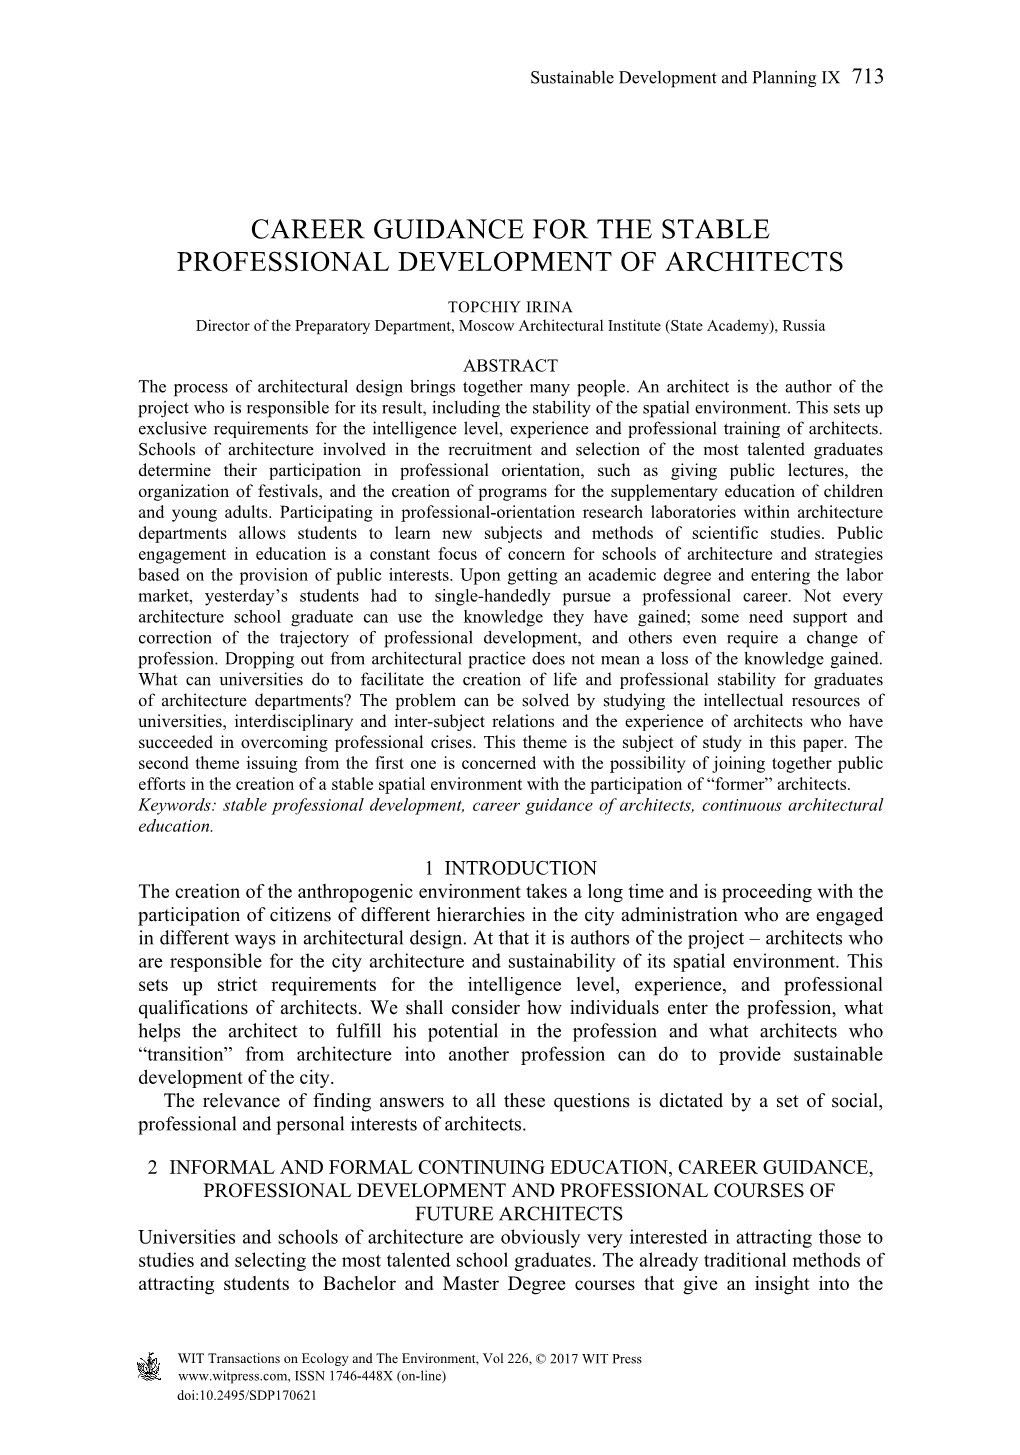 Career Guidance for the Stable Professional Development of Architects